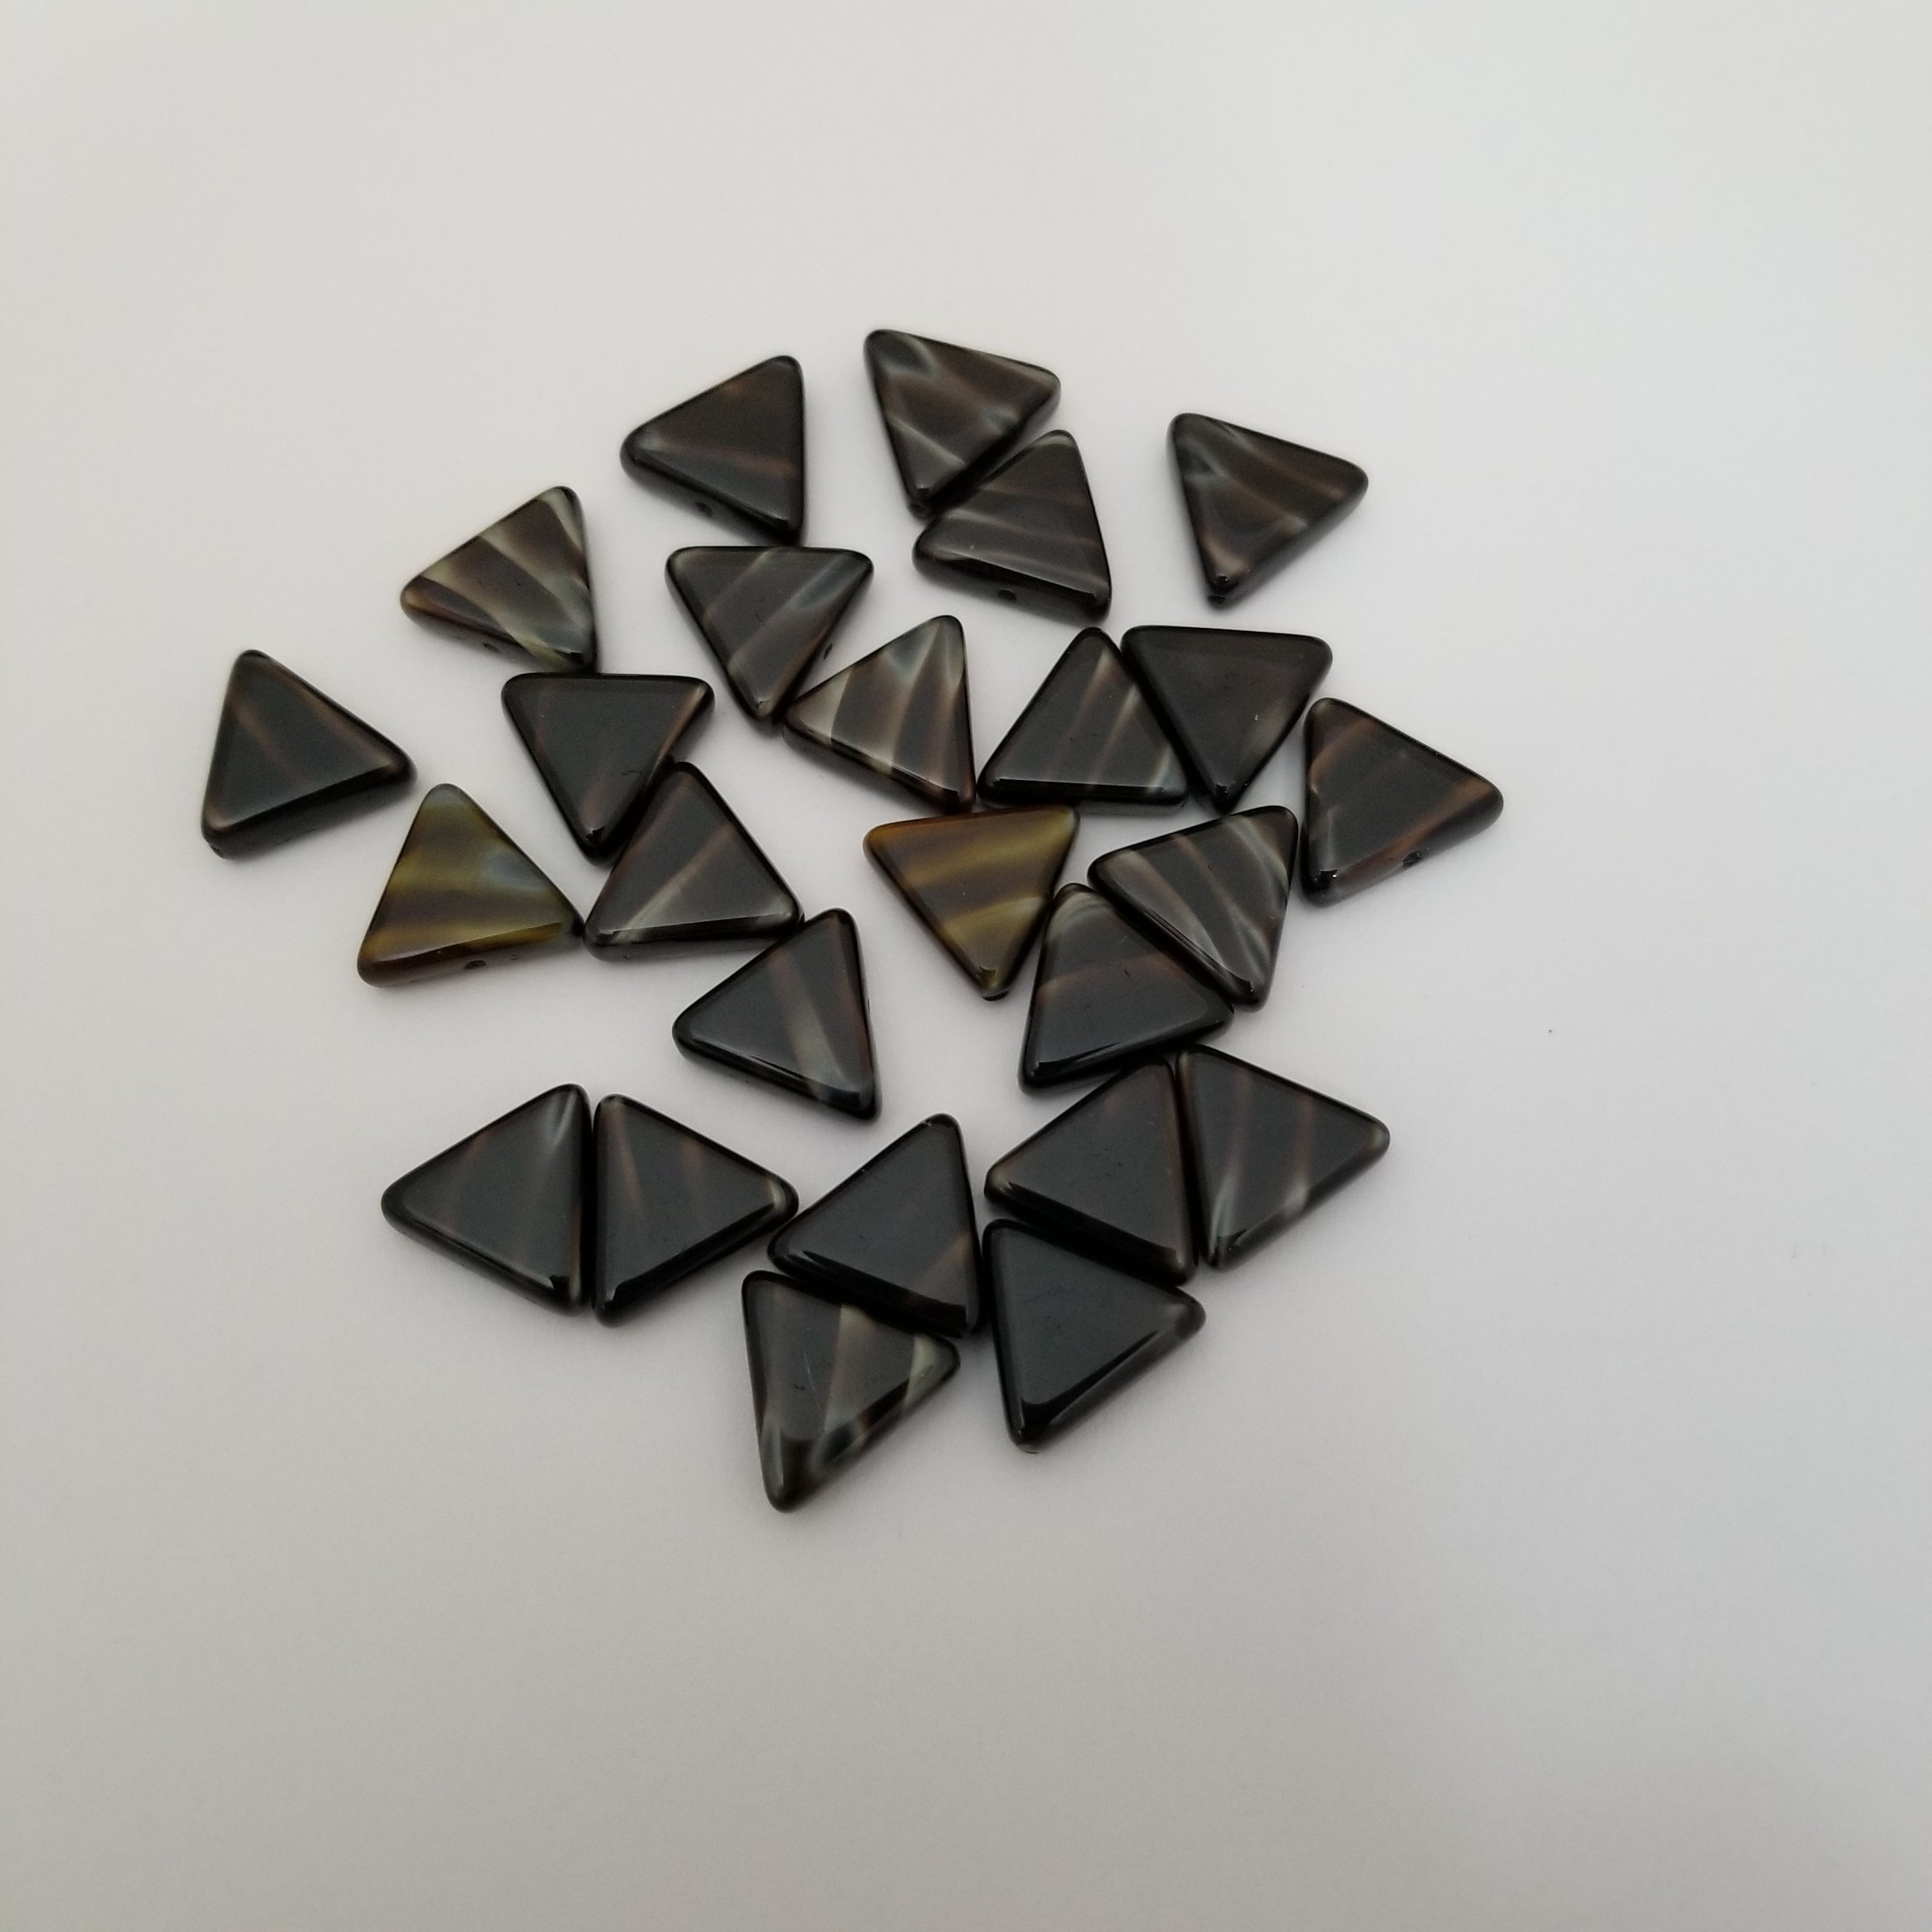 12mm "Tortise Shell" Glass Triangles